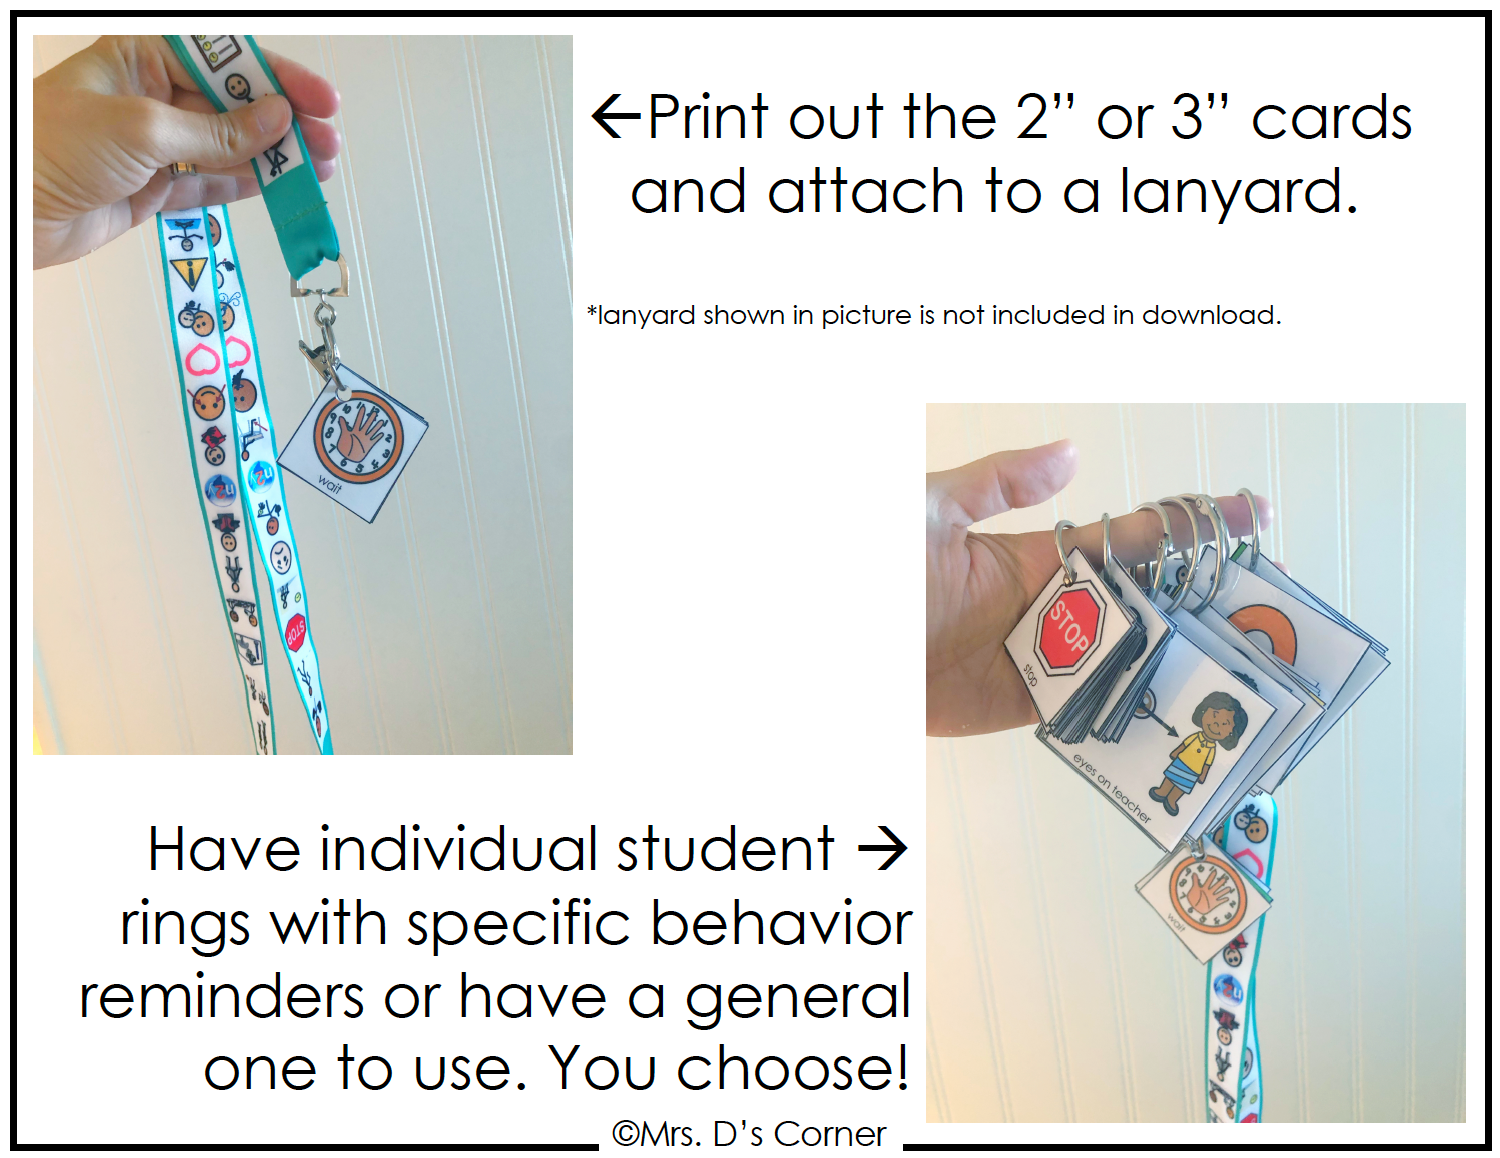 Check out our new lanyard visuals. Visuals are incredibly important as they  support the processing of information and provide a visual cu